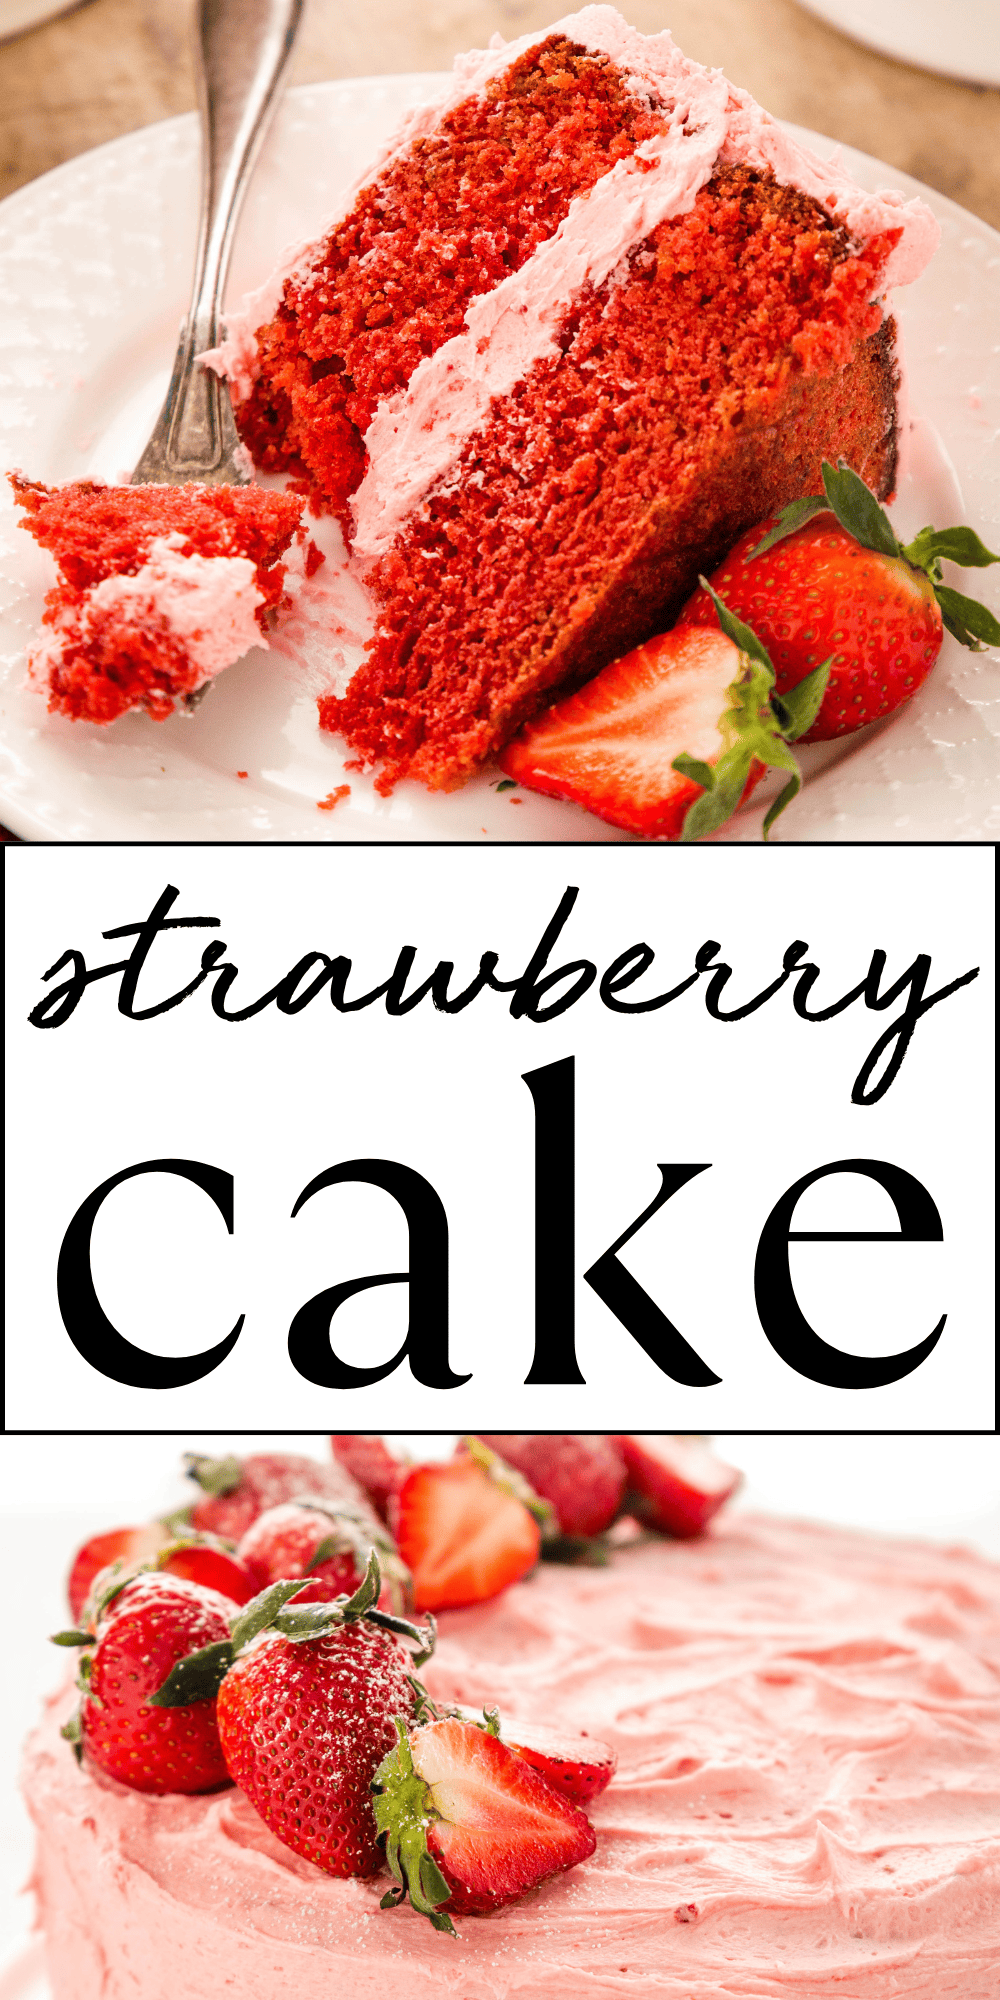 This homemade Strawberry Cake recipe is moist, tender and made with fresh strawberries and a fluffy, fresh strawberry buttercream frosting! An easy layer cake recipe with PRO baking tips! Recipe from thebusybaker.ca! #strawberrycake #freshstrawberrycake #strawberrybuttercream #strawberries #strawberrydessert #strawberrycakerecipe #summerdessert #summercake #strawberrylayercake #layercake #cakeforbeginners #bakingtips #protips via @busybakerblog